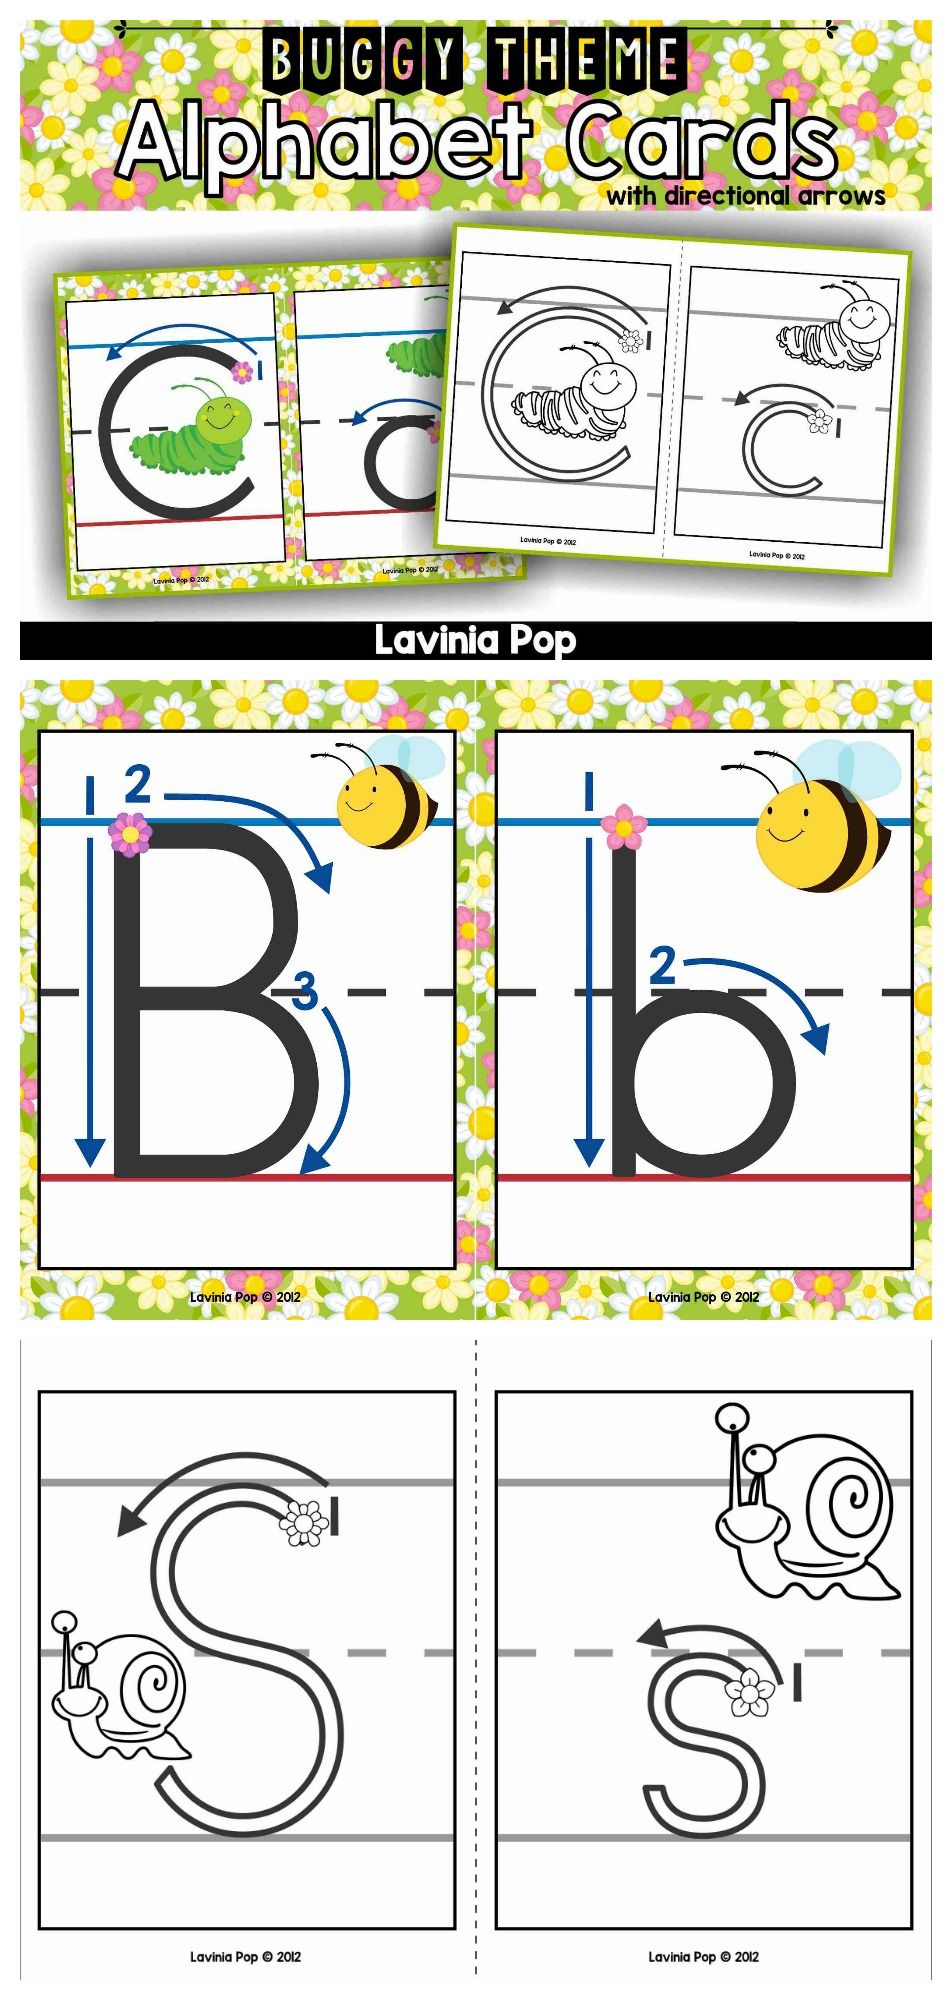 Alphabet Handwriting Cards With Directional Arrows - Buggy throughout Tracing Letters With Directional Arrows